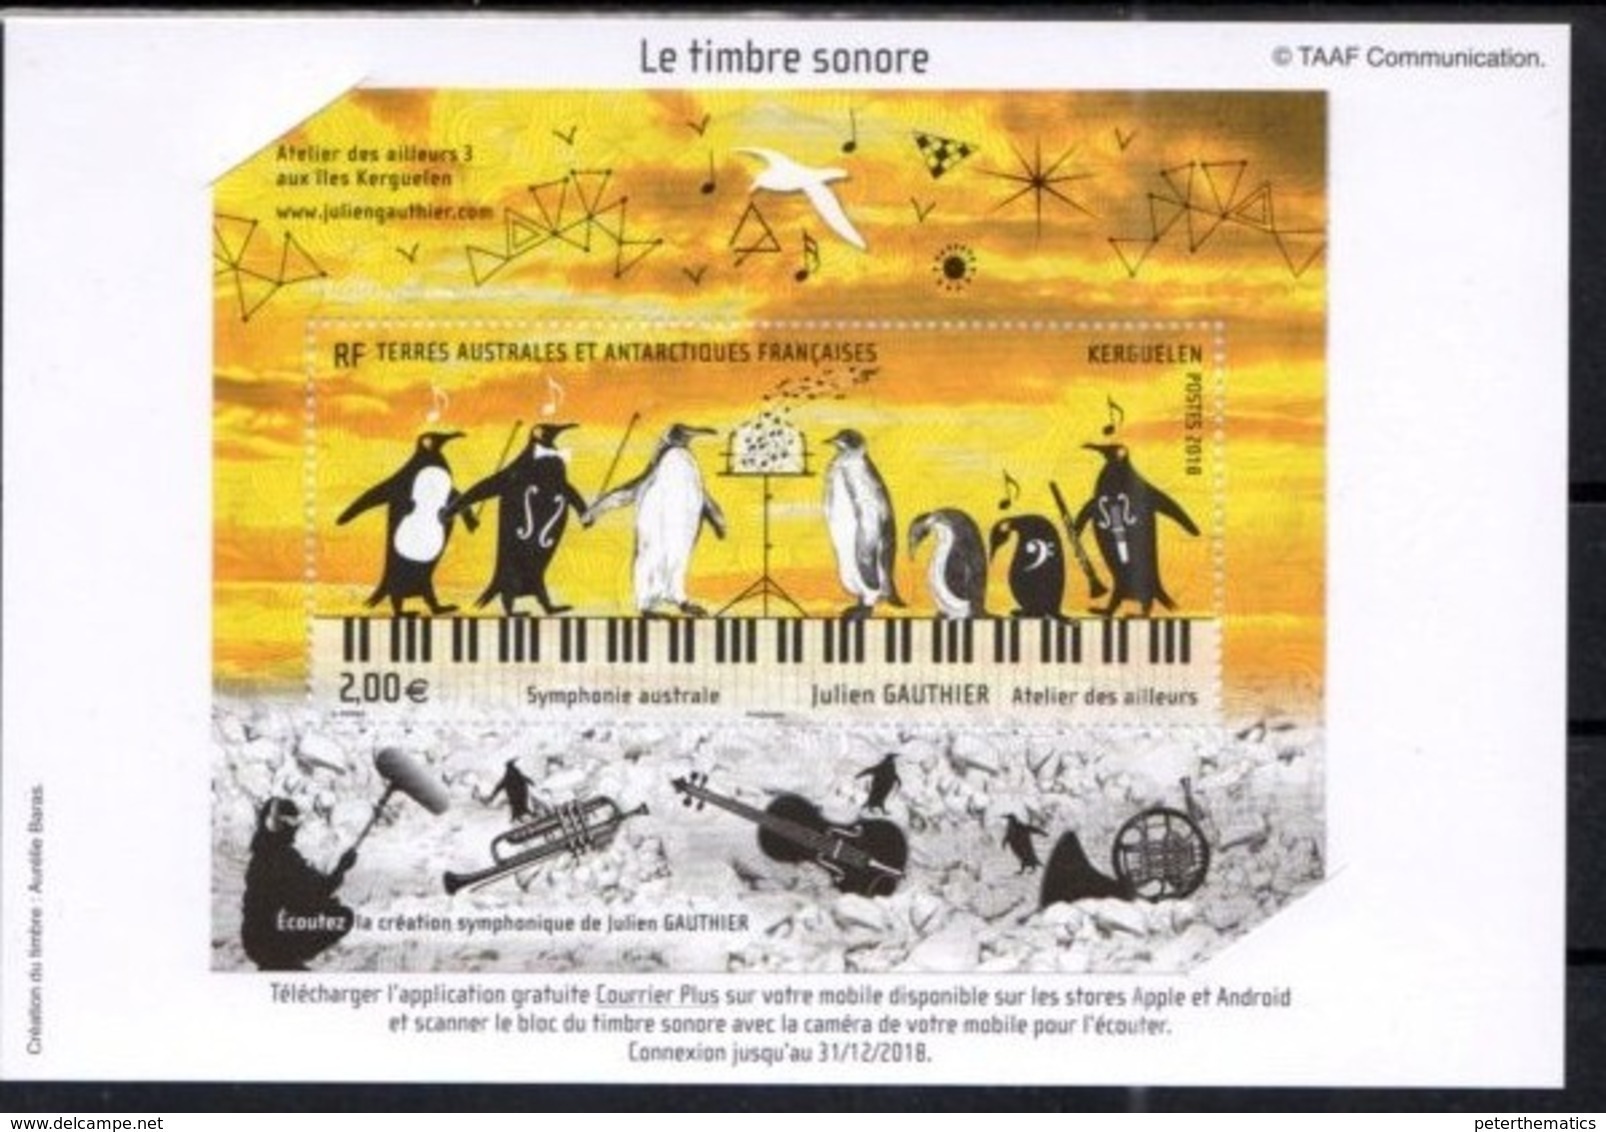 TAAF , 2018, MNH, LE TIMBRE SONORE, PENGUINS, MUSIC, MUSICAL INSTRUMENTS, S/SHEET IN CARDBOARD FRAME - Penguins